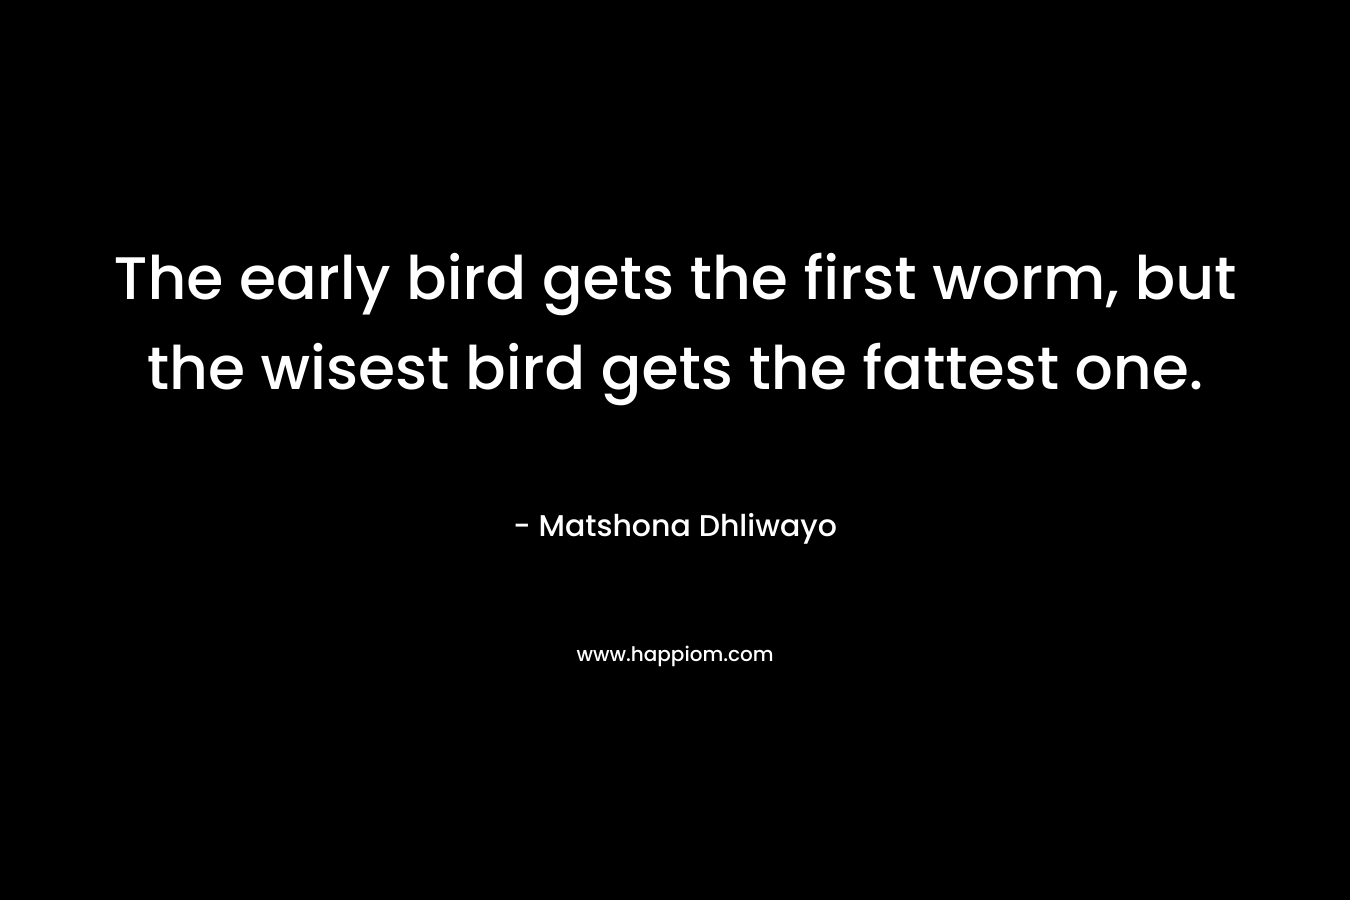 The early bird gets the first worm, but the wisest bird gets the fattest one. – Matshona Dhliwayo